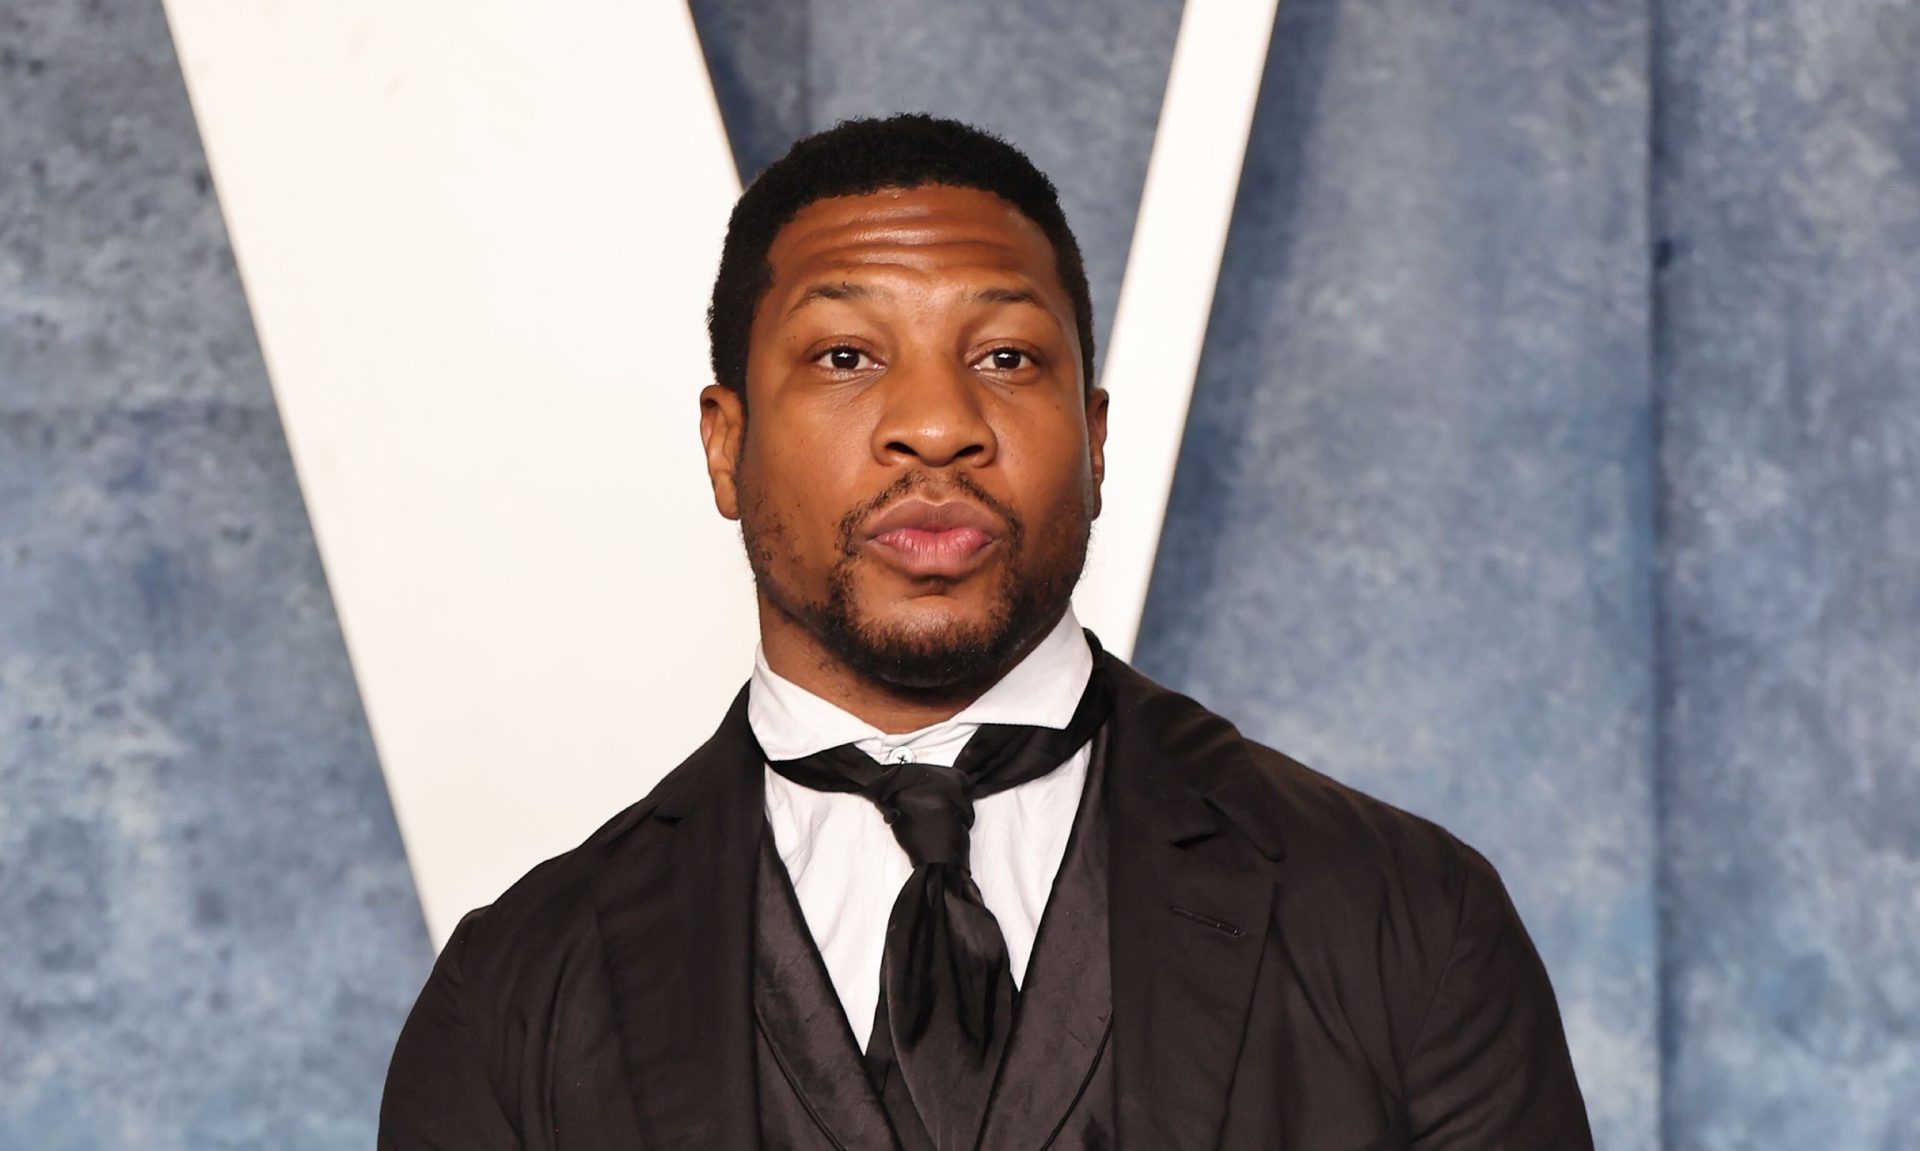 Jonathan Majors Arrested For Domestic Assault, Strangulation, And Harassment; Lawyer Claims Woman Recanted Allegations After His Arrest